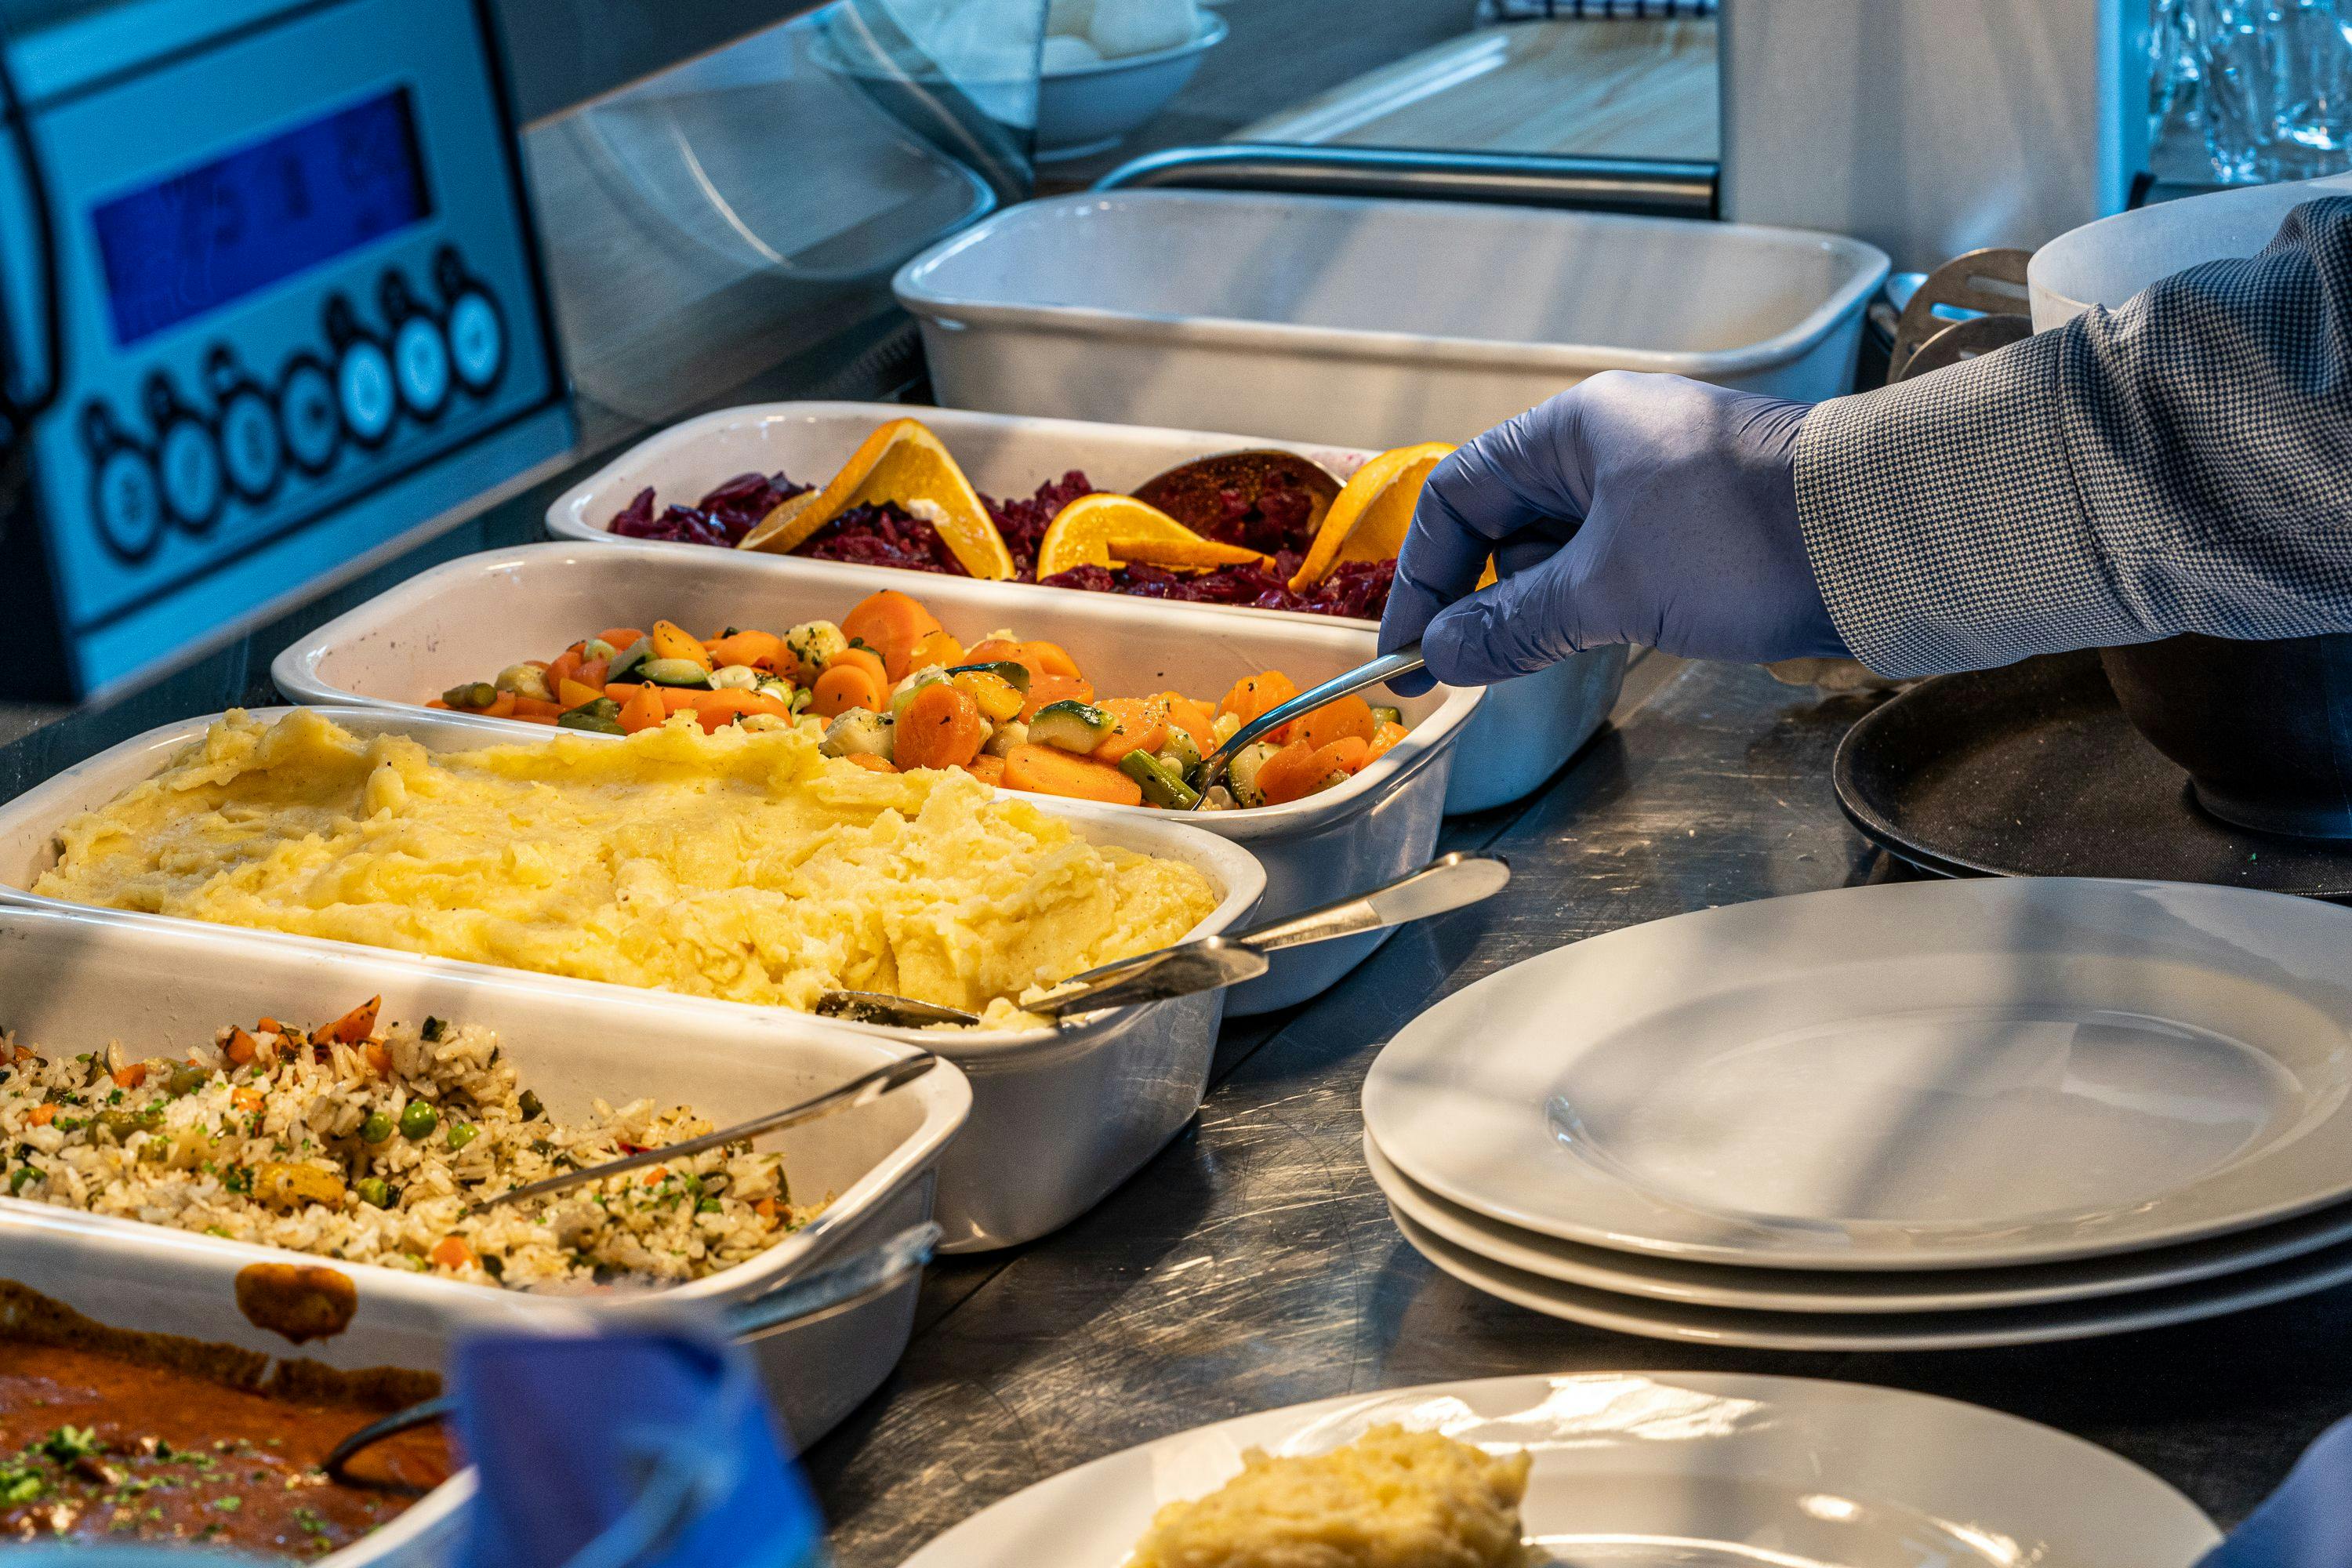 Meals at The Grange care home in Faringdon, Oxfordshire